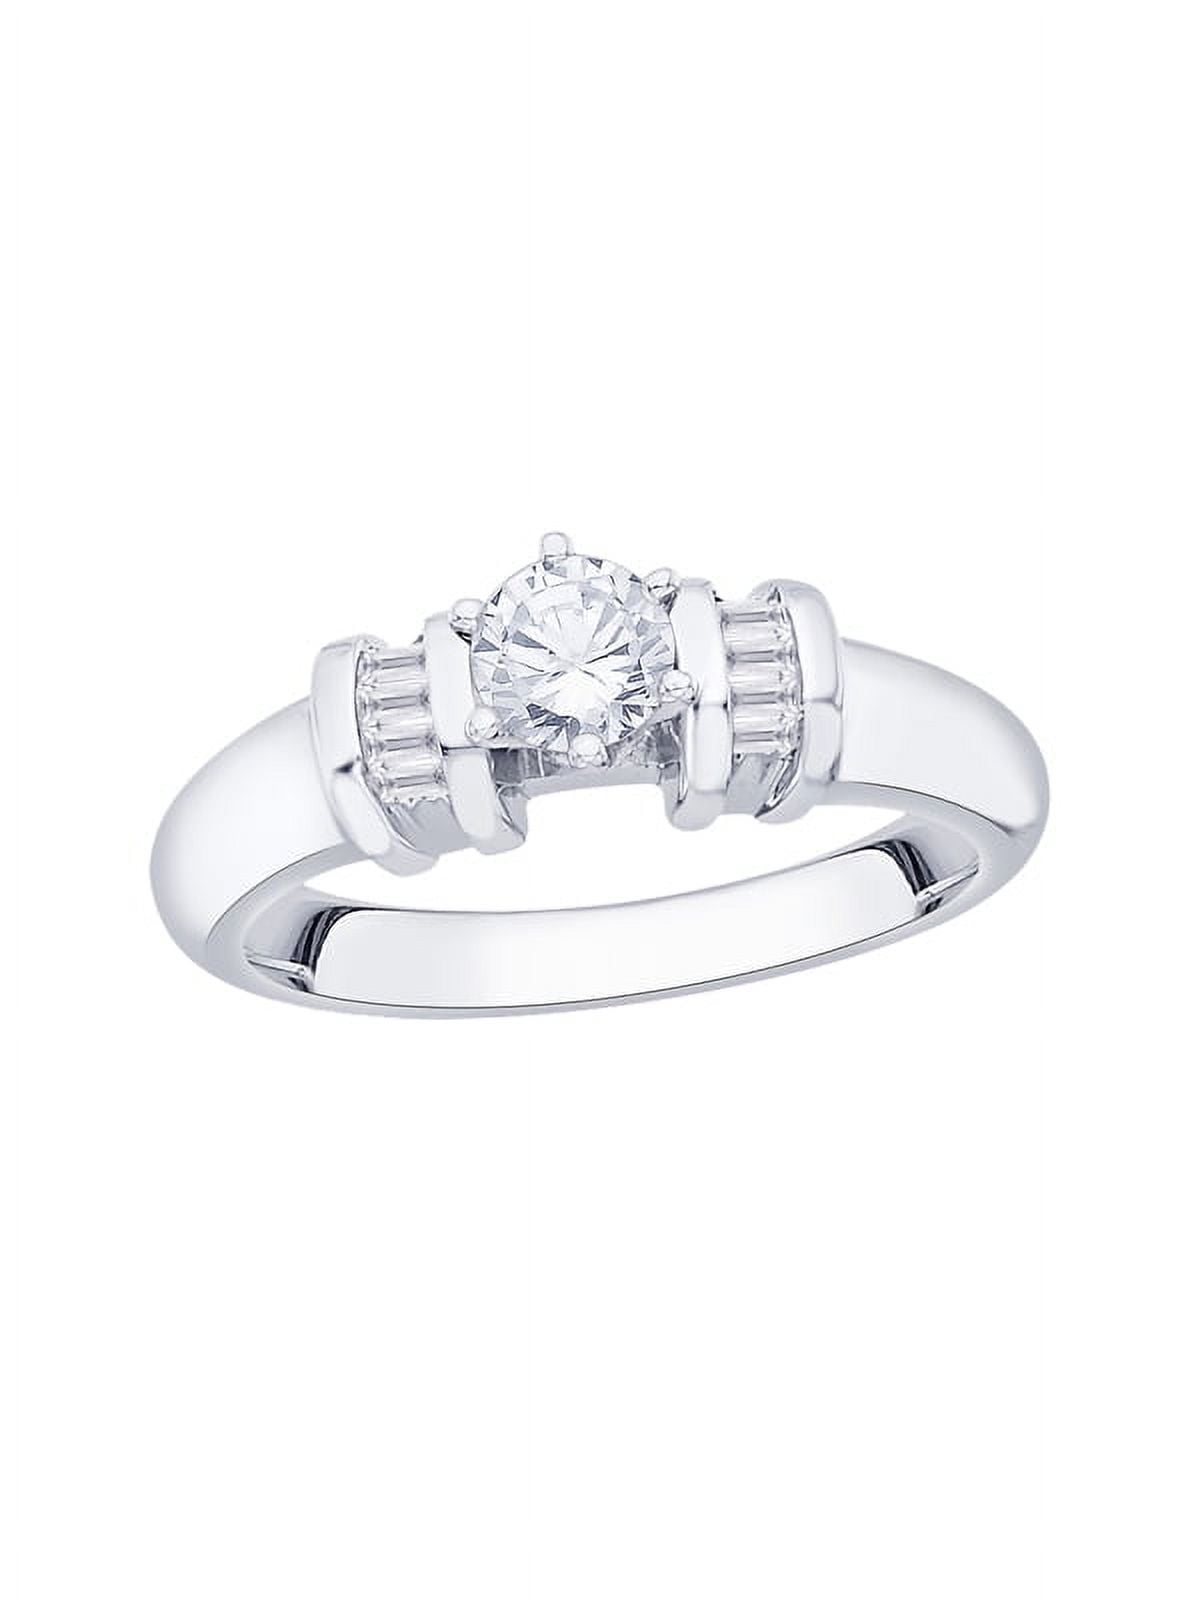 KATARINA Round and Baguette Cut Diamond Engagement Ring in